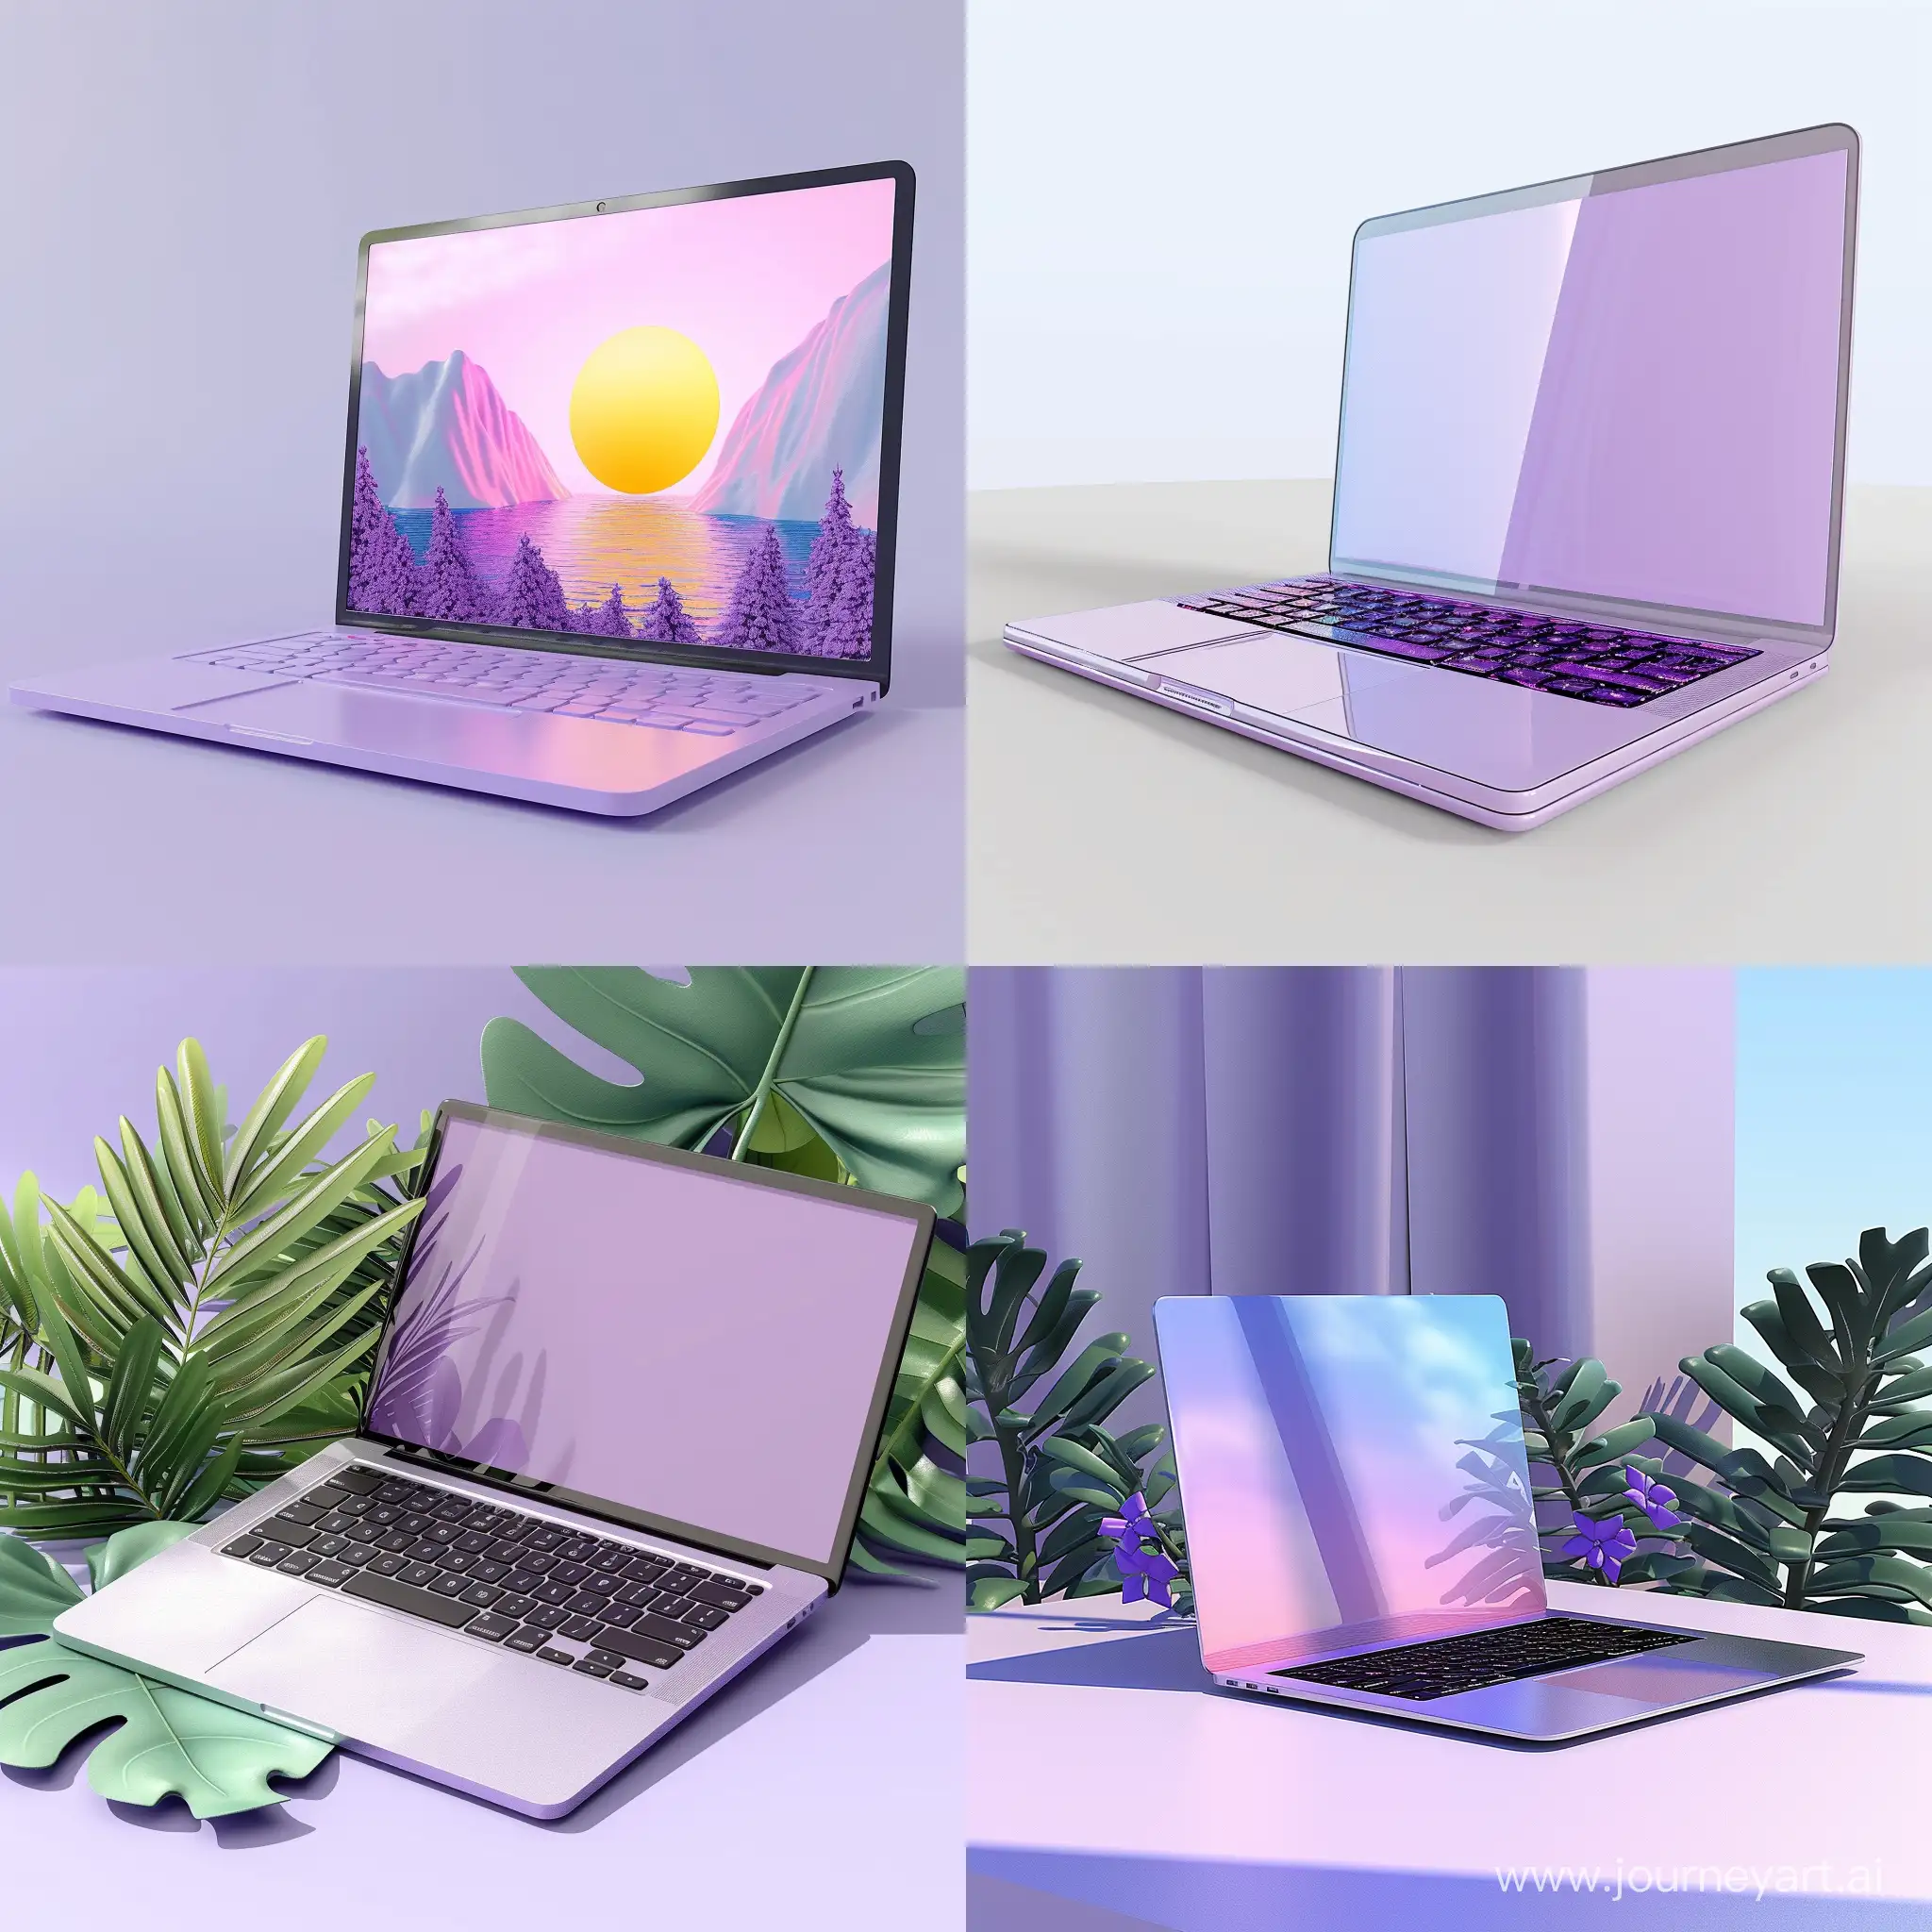 Vibrant-Outdoor-Laptop-in-Pastel-Colors-HighQuality-3D-Digital-Illustration